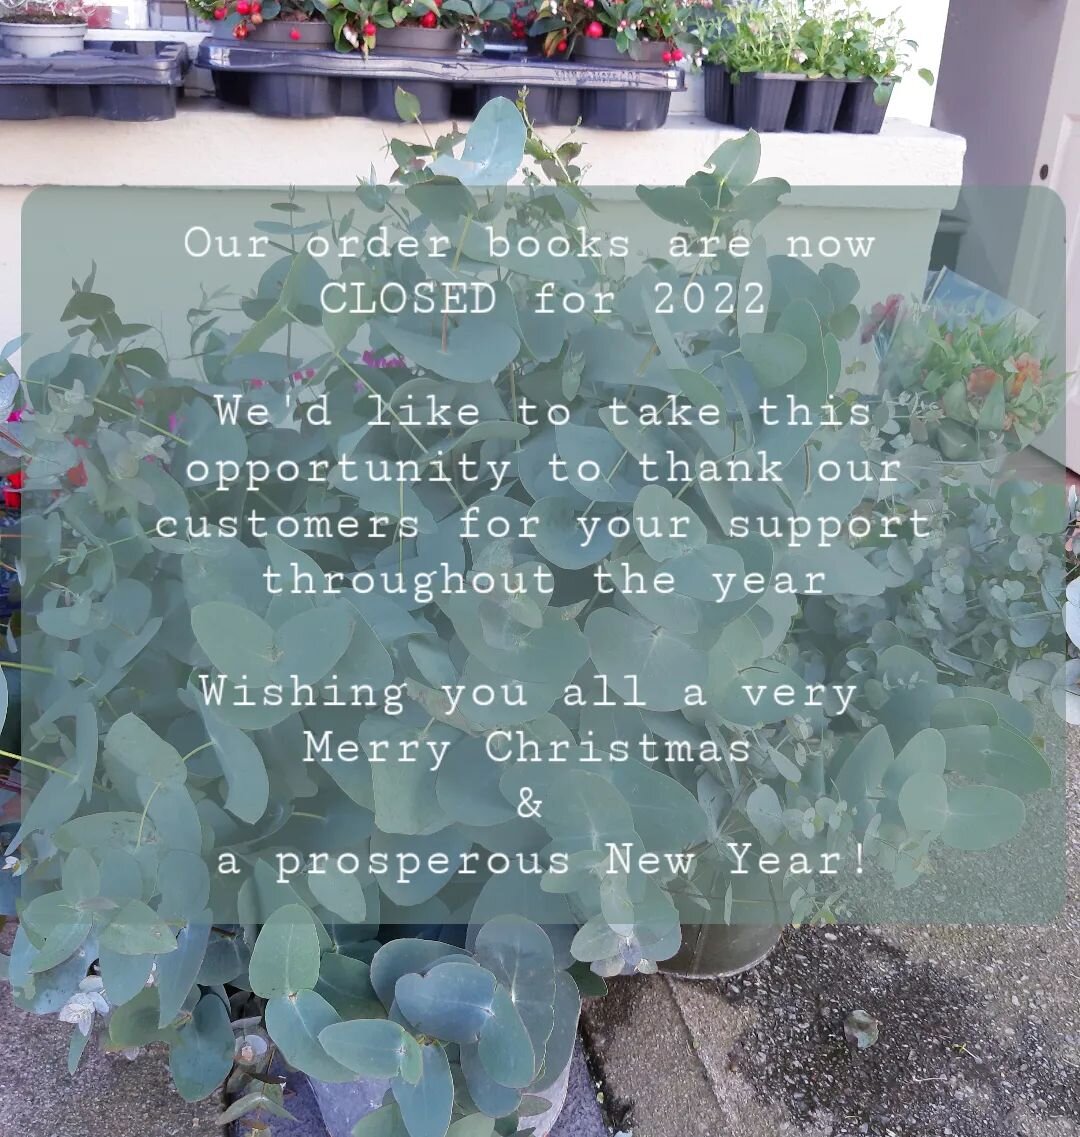 Thank you so much! Our order books are now CLOSED for 2022

Wishing all our customers a very Merry Christmas &amp; a prosperous New Year from all at the Village Florist 🎄🎉🌟